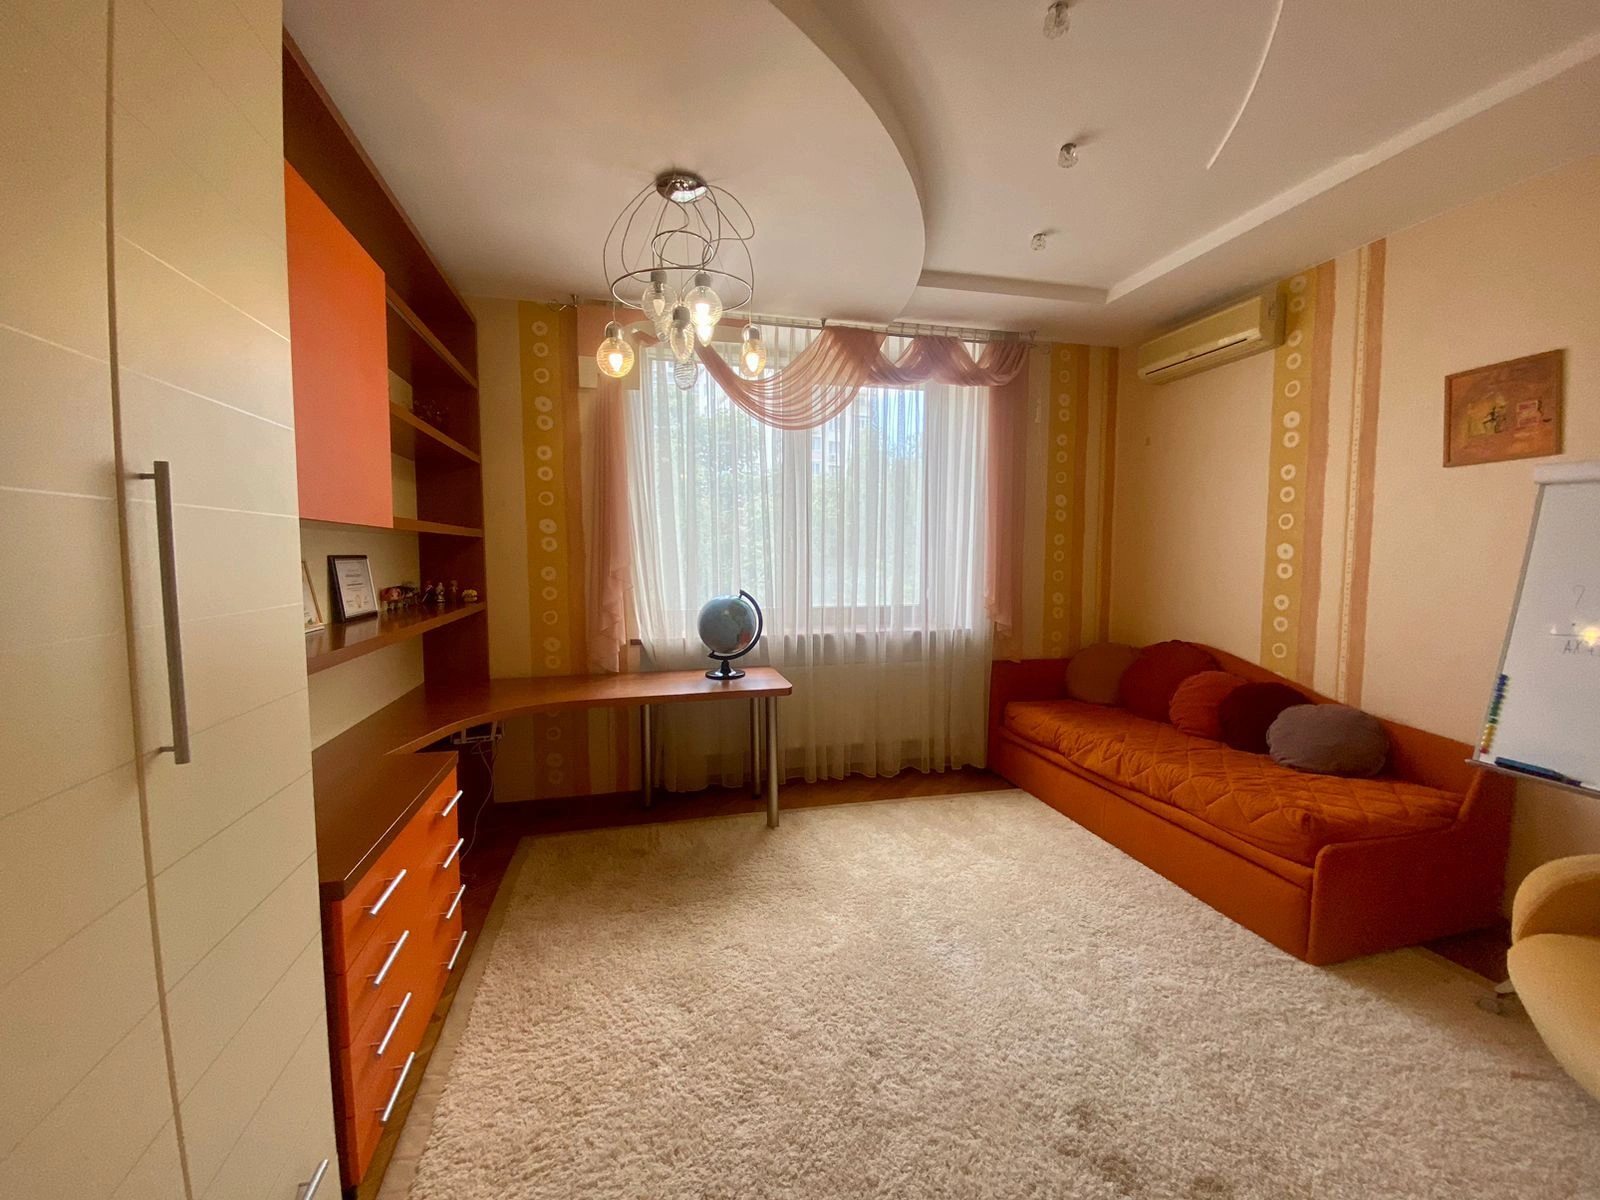 Apartments for sale. 2 rooms, 138 m², 2nd floor/5 floors. 3, Pedahohycheskyy per., Odesa. 